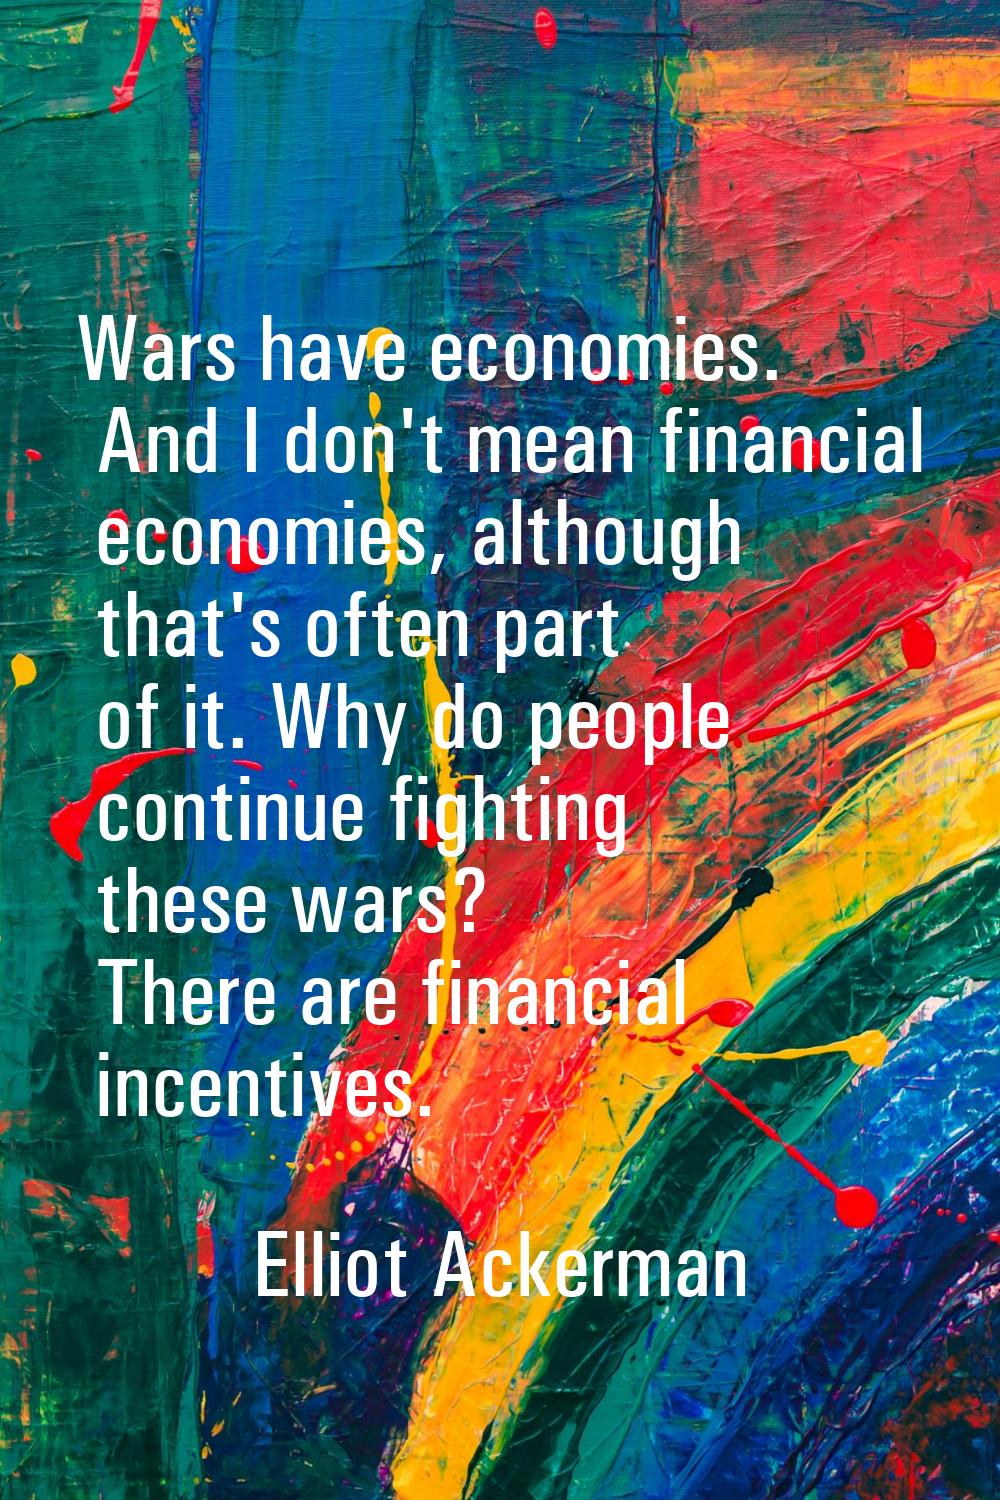 Wars have economies. And I don't mean financial economies, although that's often part of it. Why do